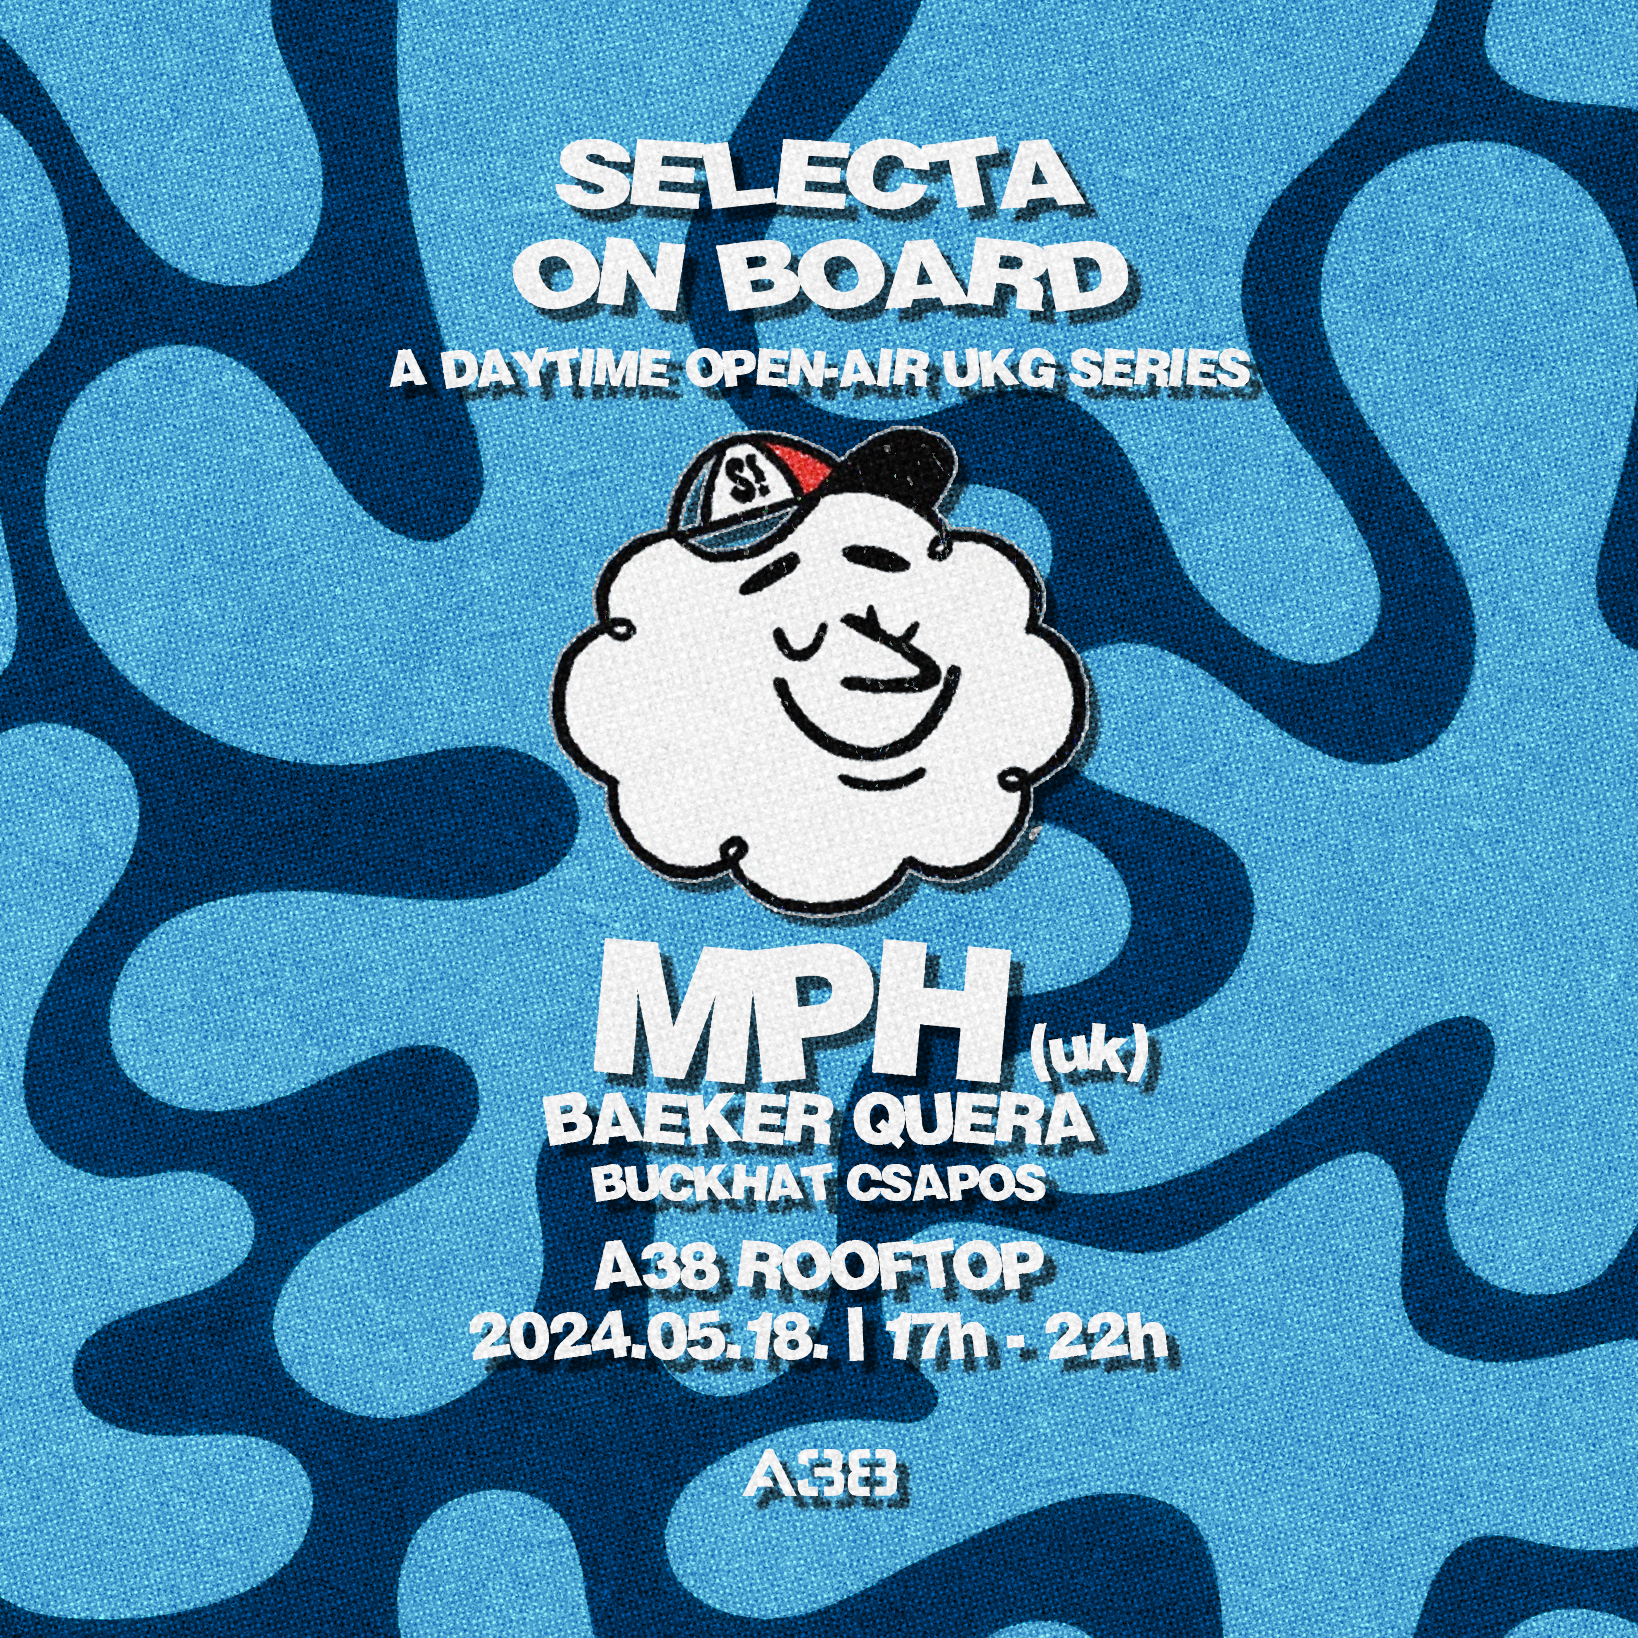 Selecta On Board with MPH (UK) - Daytime Open-Air ROOFTOP - Página frontal